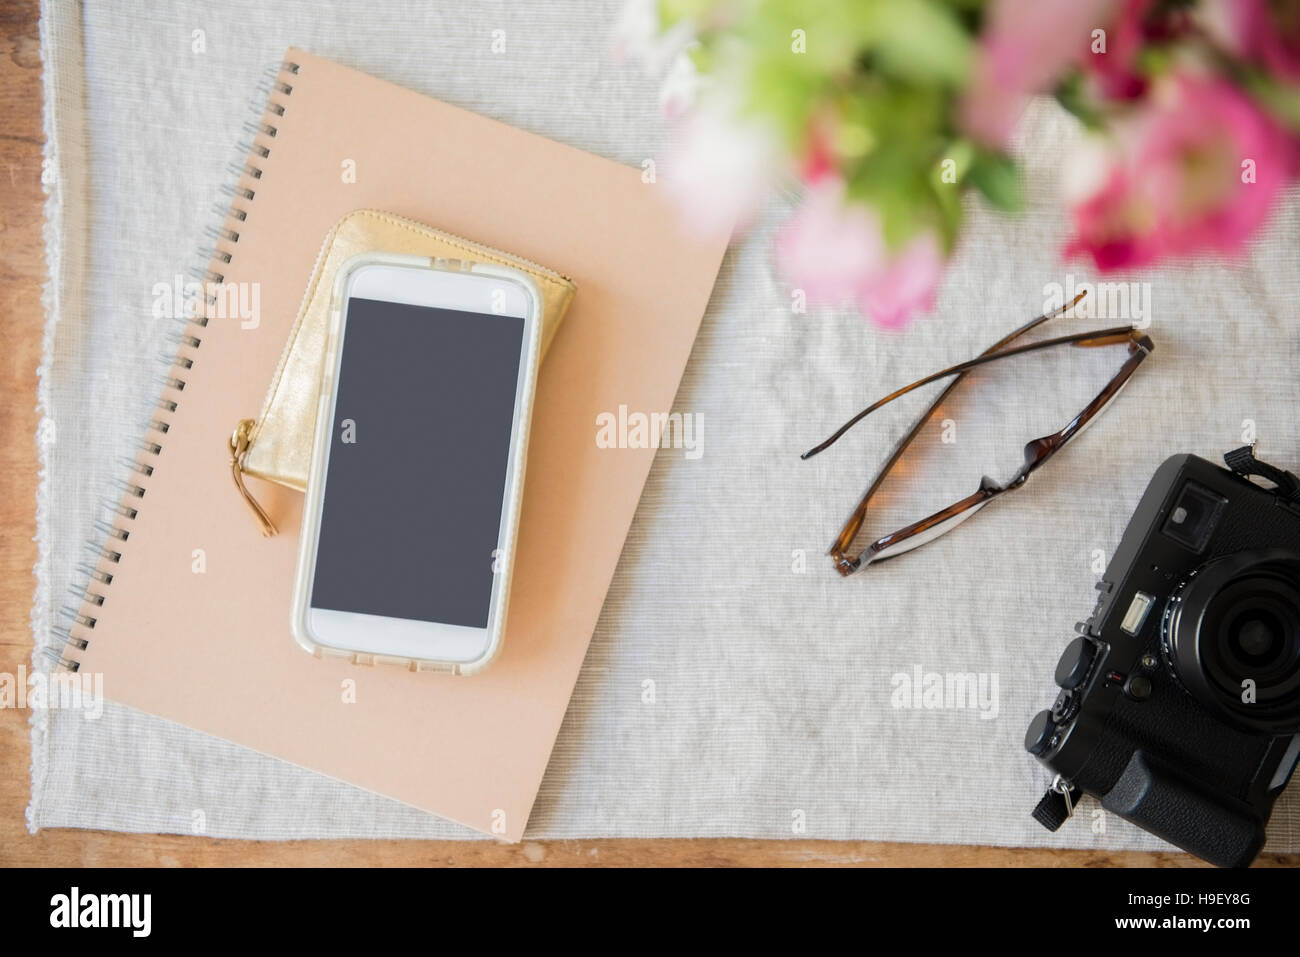 Camera, cell phone, purse, notebook and wallet on table Stock Photo